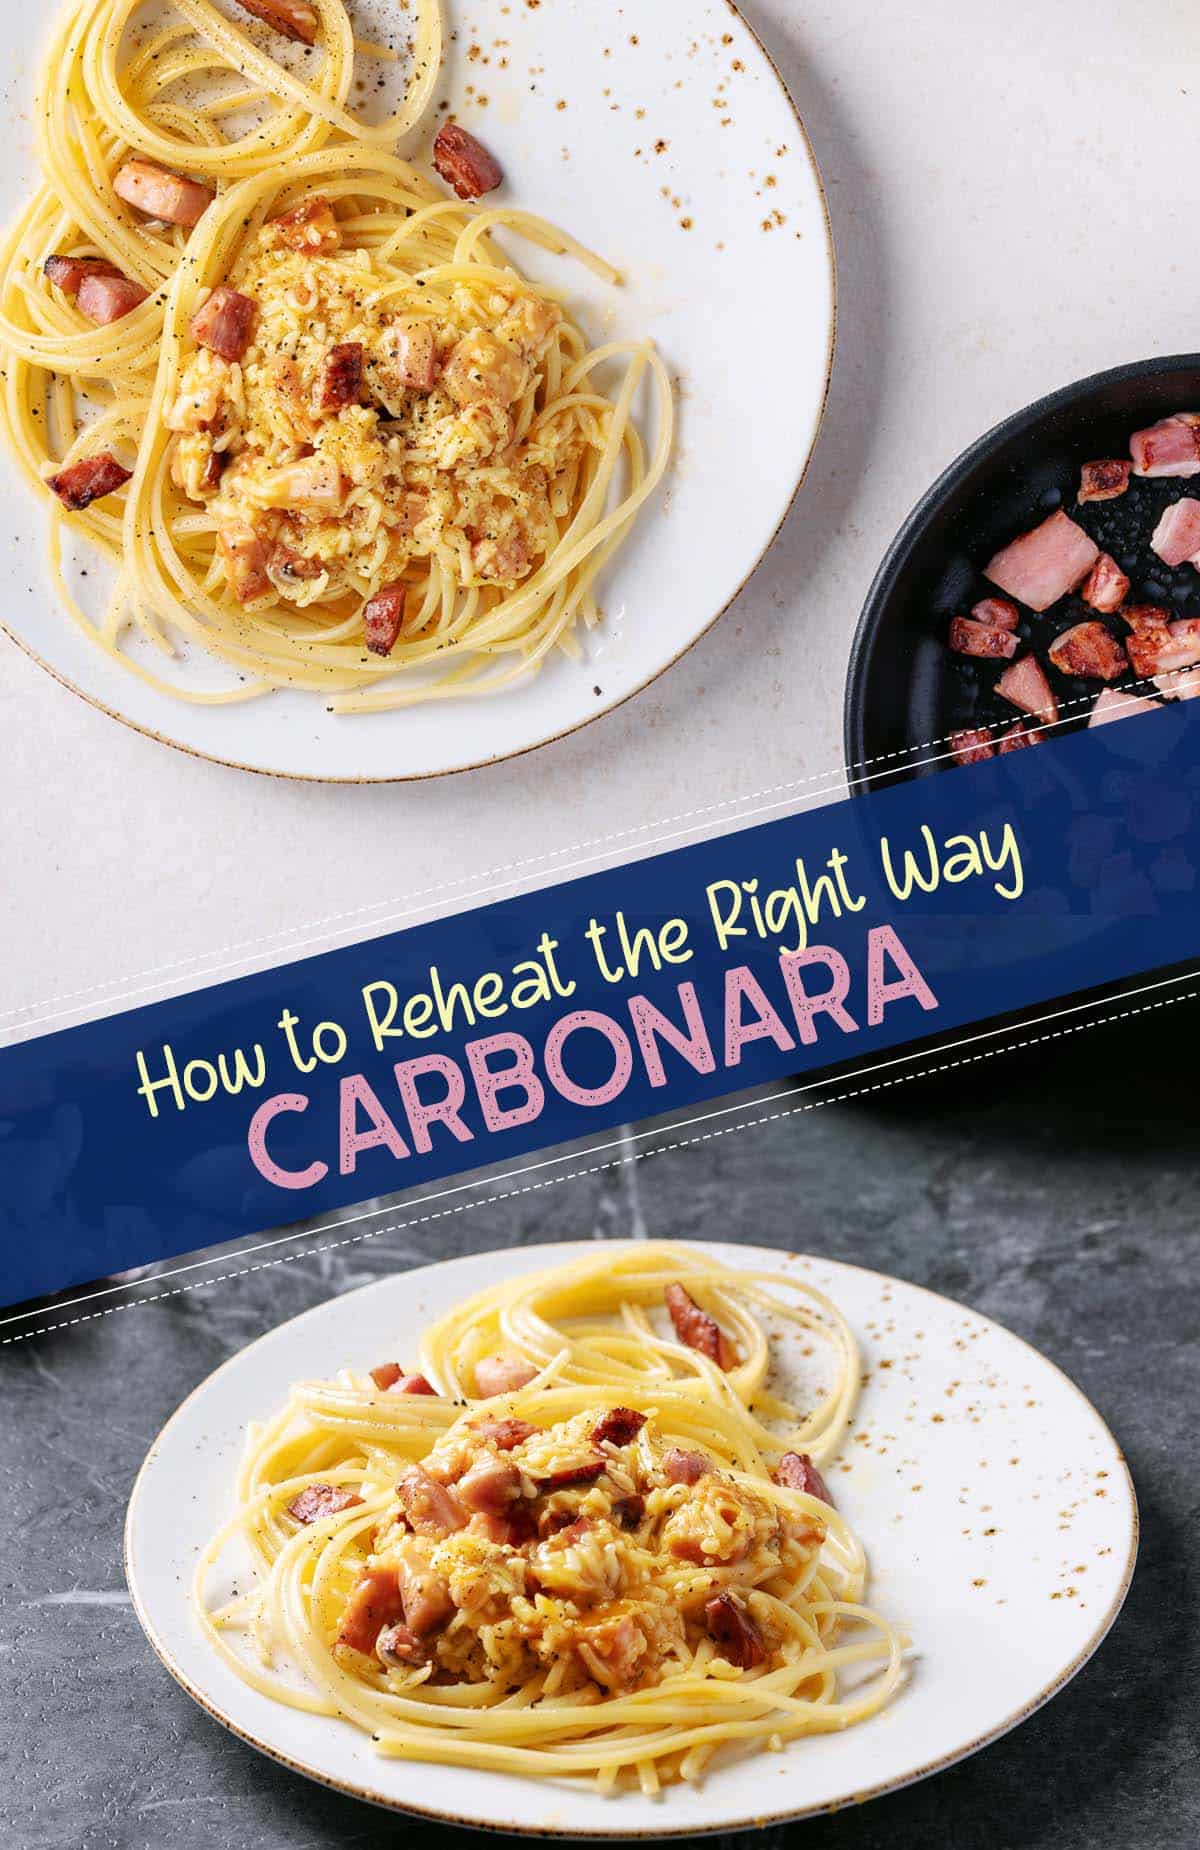 We all know the joys of digging into a creamy, delicious carbonara. But when faced with leftovers, reheating becomes a challenge. I've experimented with various methods, and today, I want to share my oven reheating secrets with you.